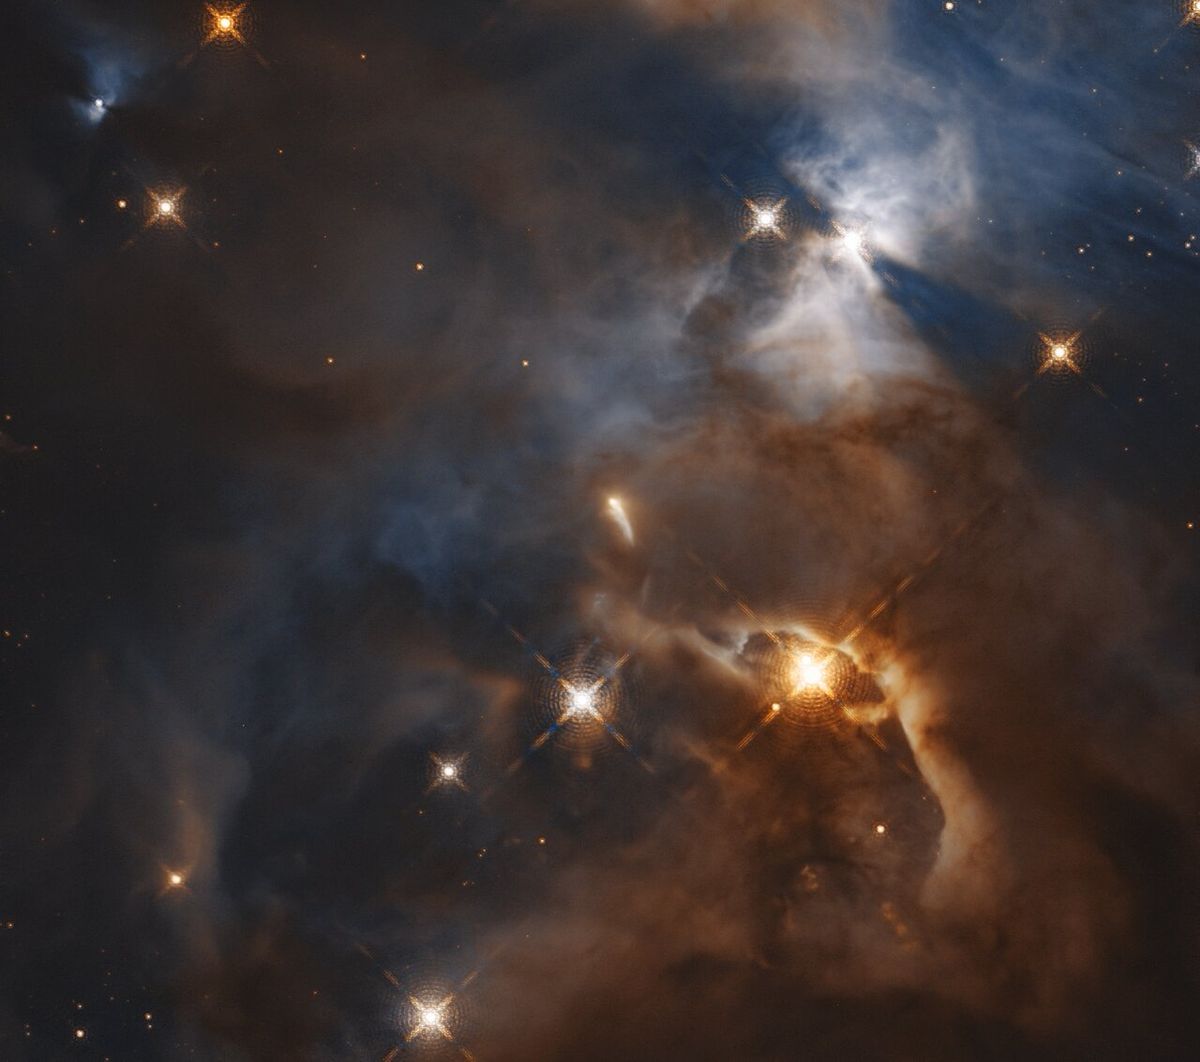 Hubble telescope spots a flapping bat signal in space